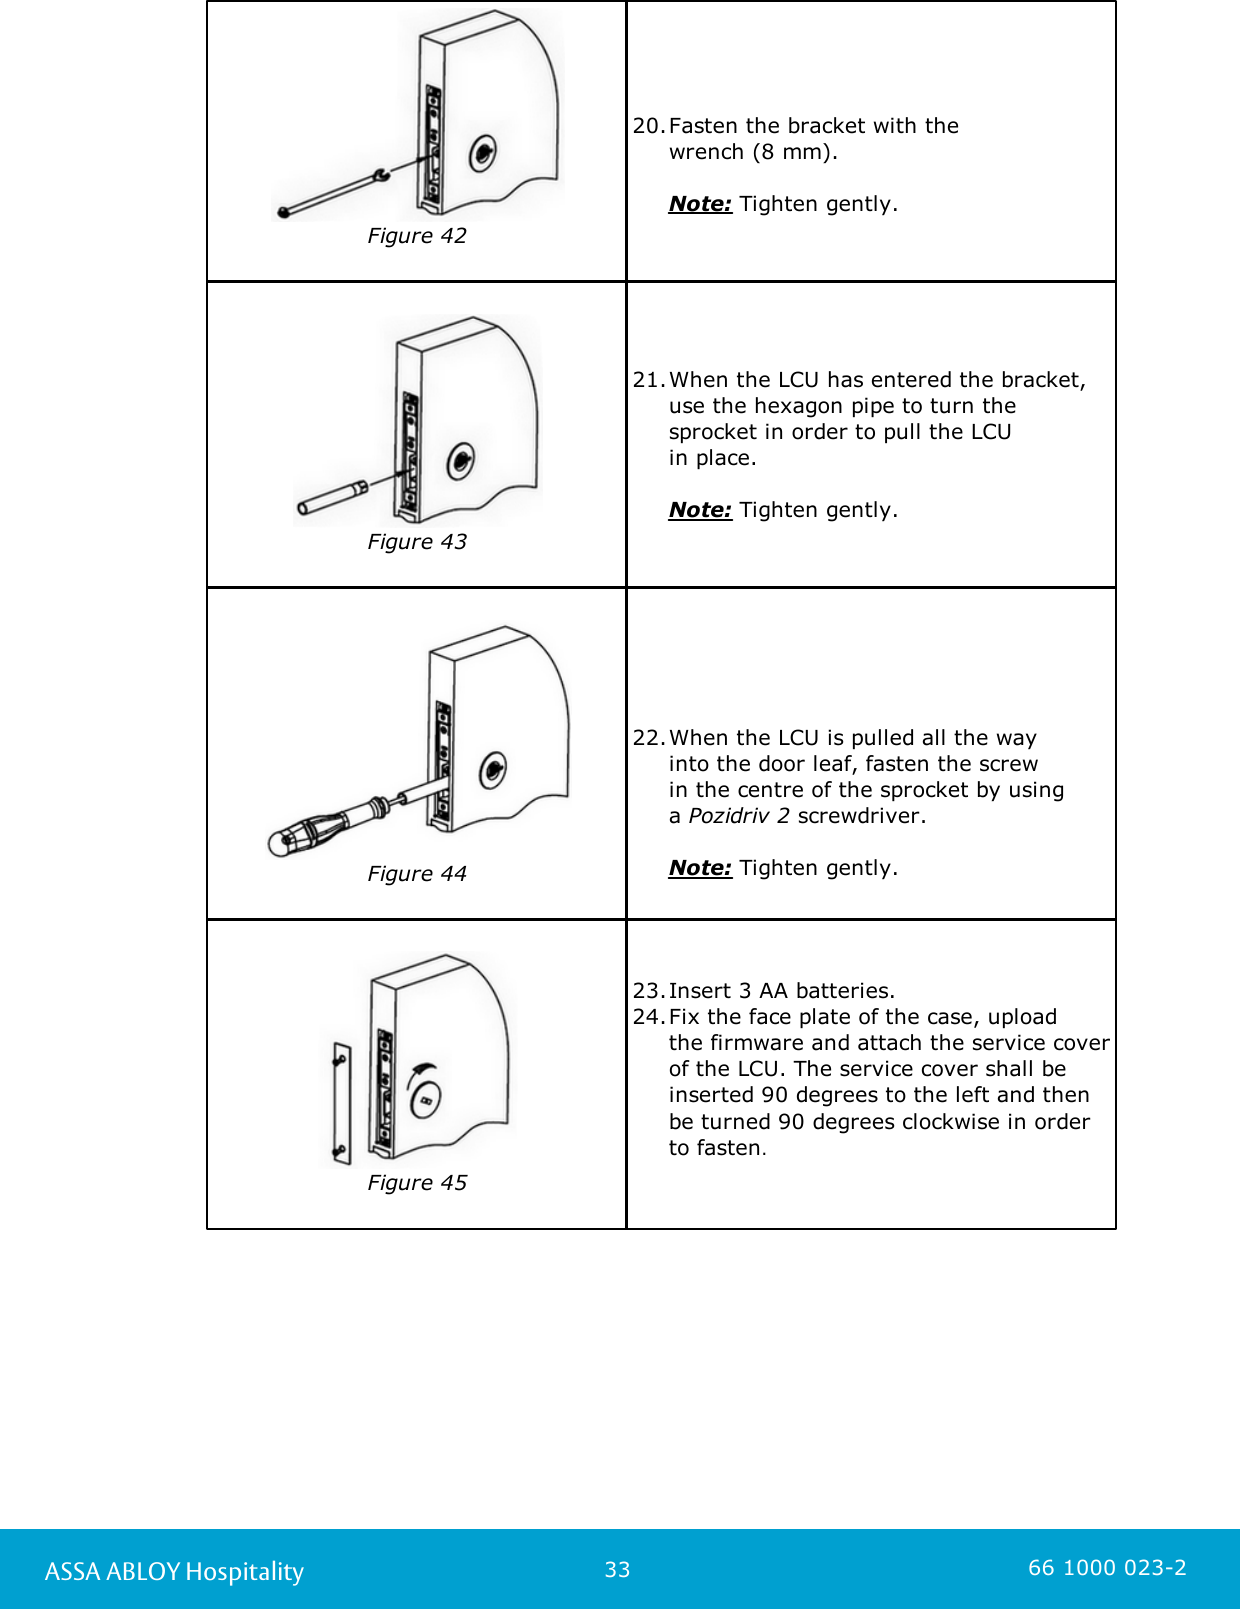 33ASSA ABLOY Hospitality 66 1000 023-2Figure 4220.Fasten the bracket with the      wrench (8 mm).      Note: Tighten gently.Figure 4321.When the LCU has entered the bracket,use the hexagon pipe to turn thesprocket in order to pull the LCU in place.      Note: Tighten gently.Figure 4422.When the LCU is pulled all the way into the door leaf, fasten the screw in the centre of the sprocket by using a Pozidriv 2 screwdriver.      Note: Tighten gently.Figure 4523.Insert 3 AA batteries. 24.Fix the face plate of the case, upload the firmware and attach the service coverof the LCU. The service cover shall beinserted 90 degrees to the left and thenbe turned 90 degrees clockwise in orderto fasten. 